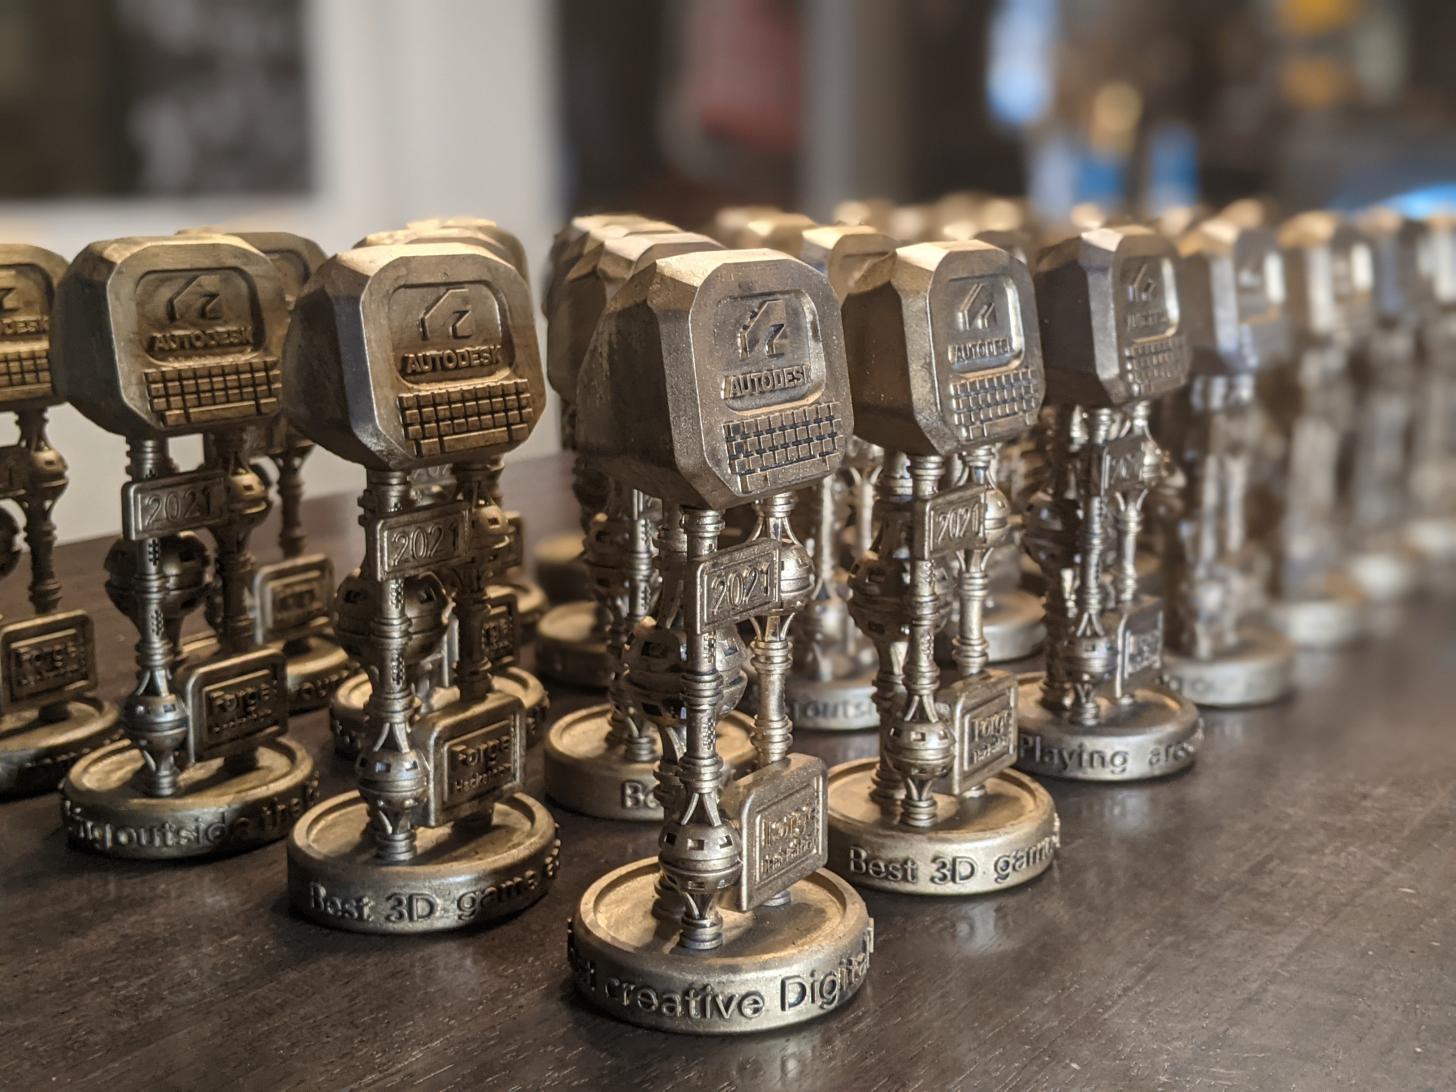 Autodesk Forge trophies